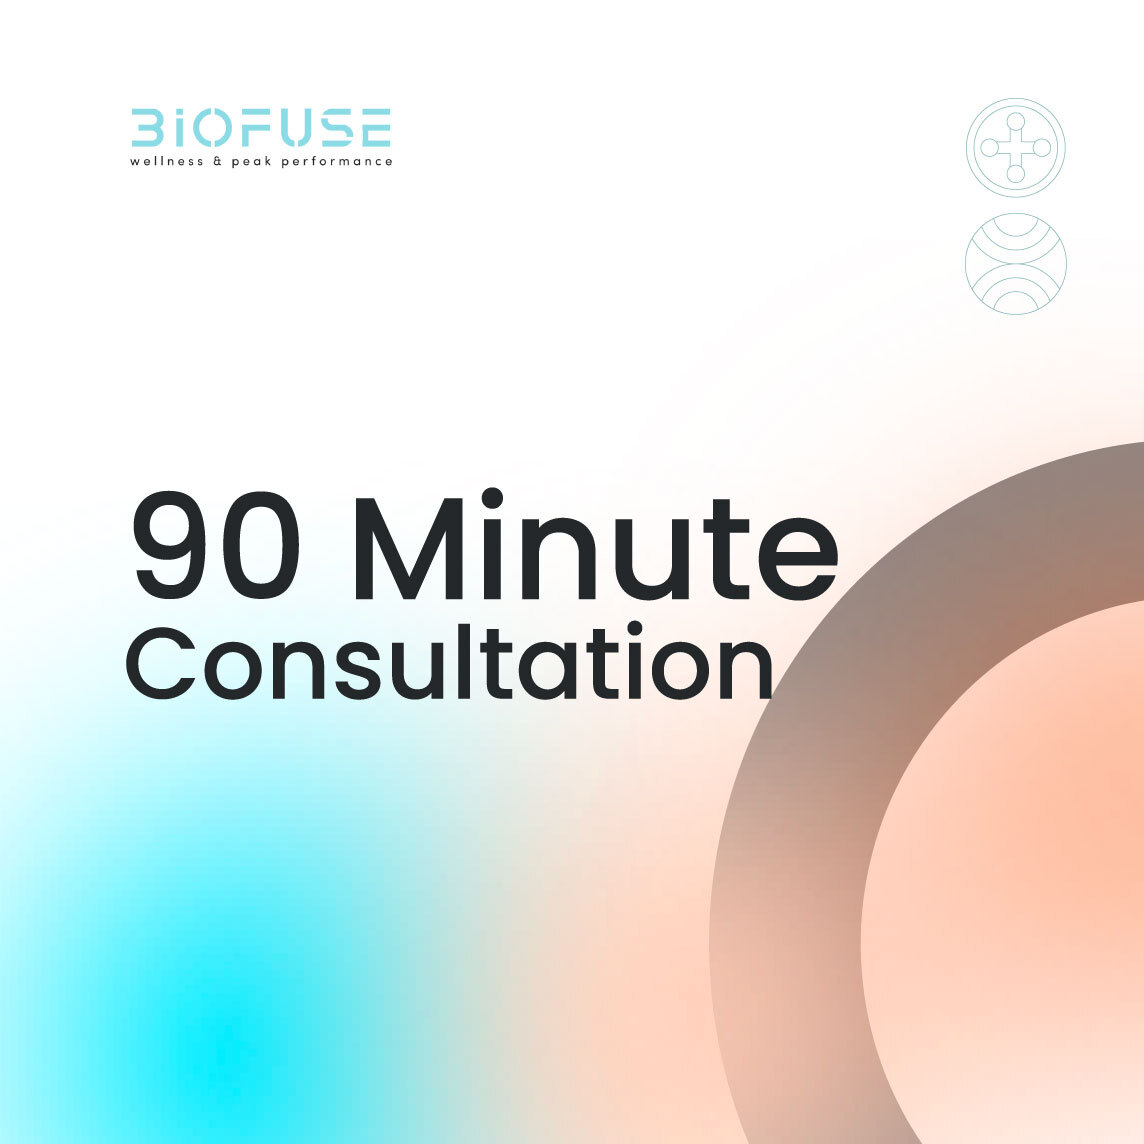 Image about 90 minute consultation at Biofuse